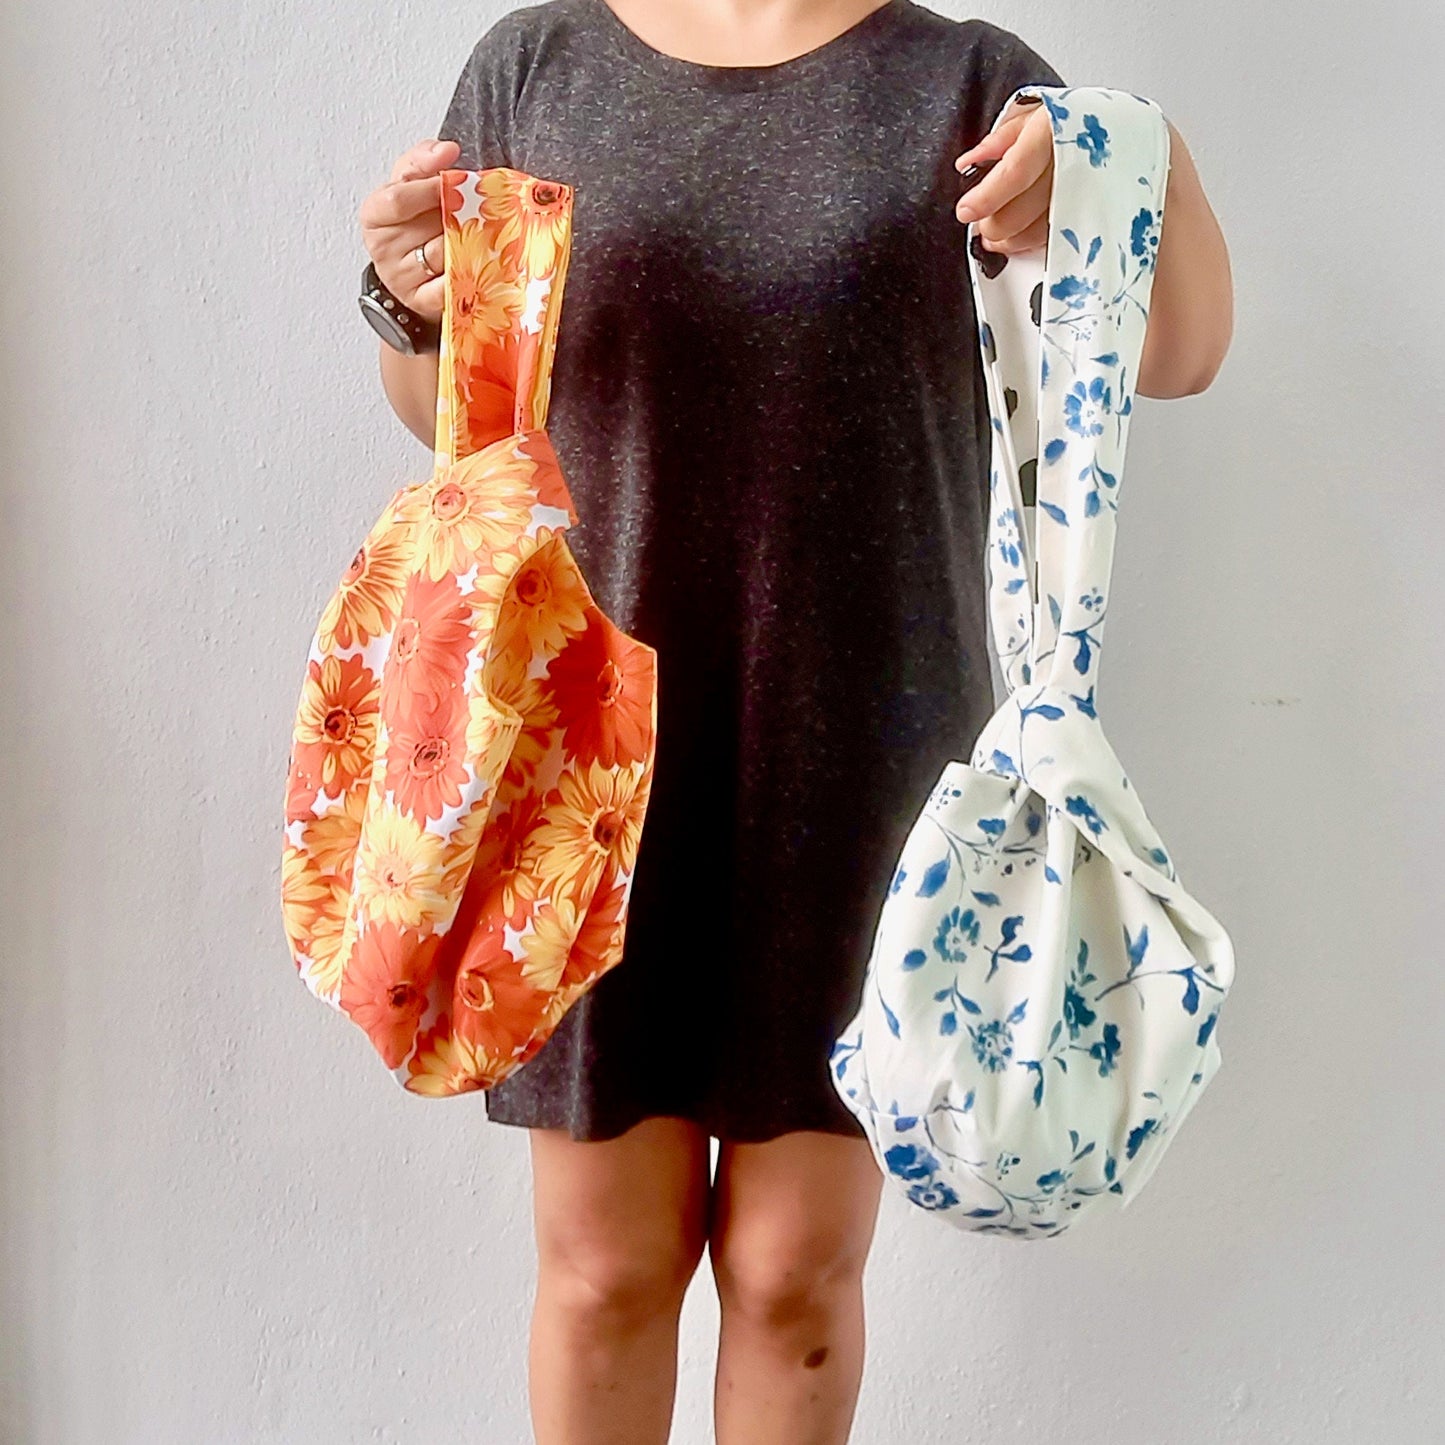 Reversible Knot Bag Pattern- 4 different sizes and style /Video Tutorial